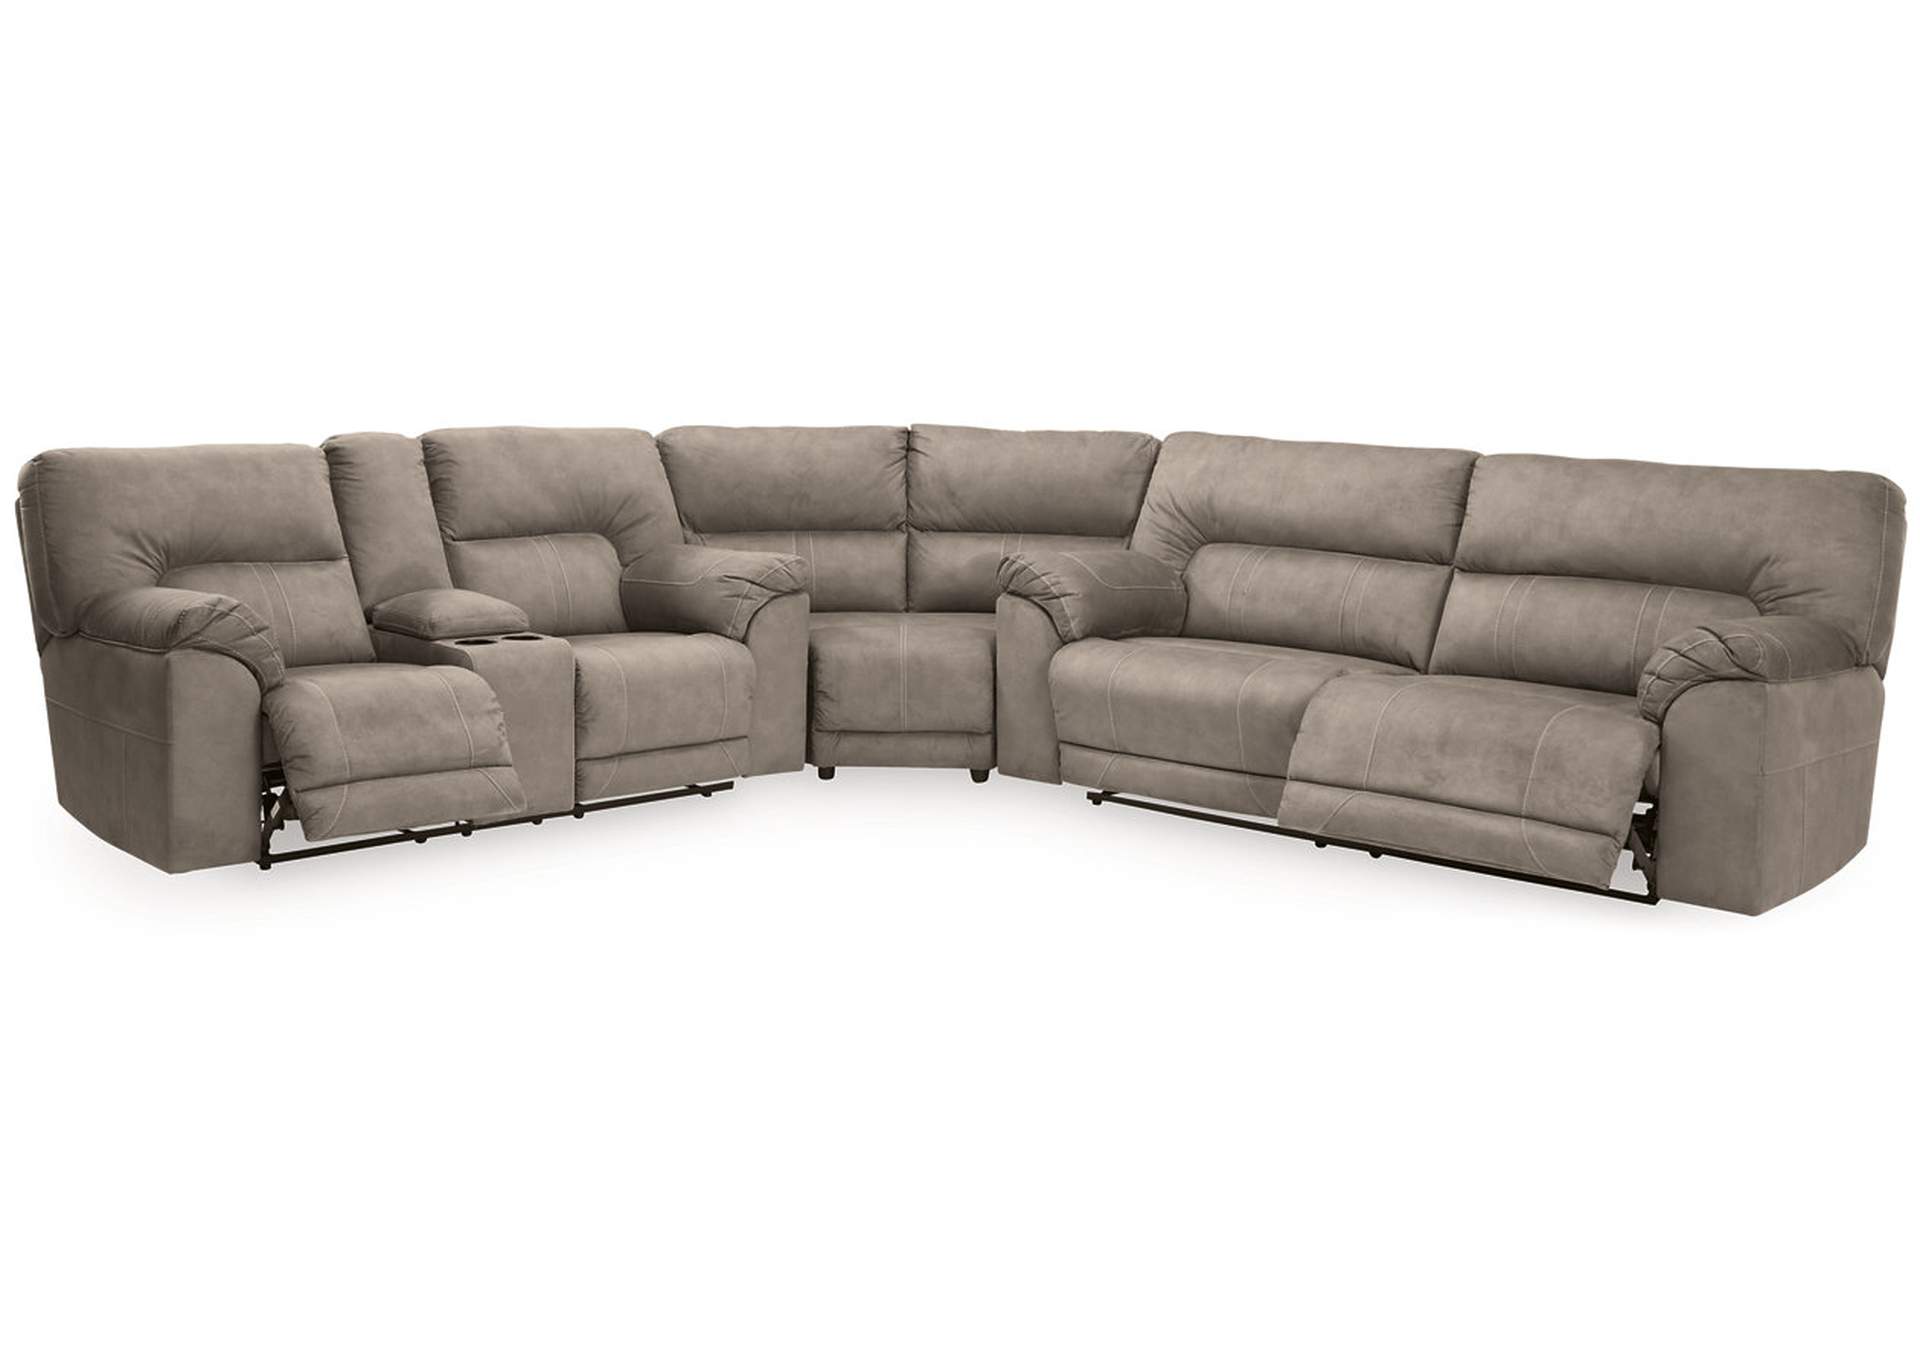 Cavalcade 3-Piece Reclining Sectional,Benchcraft